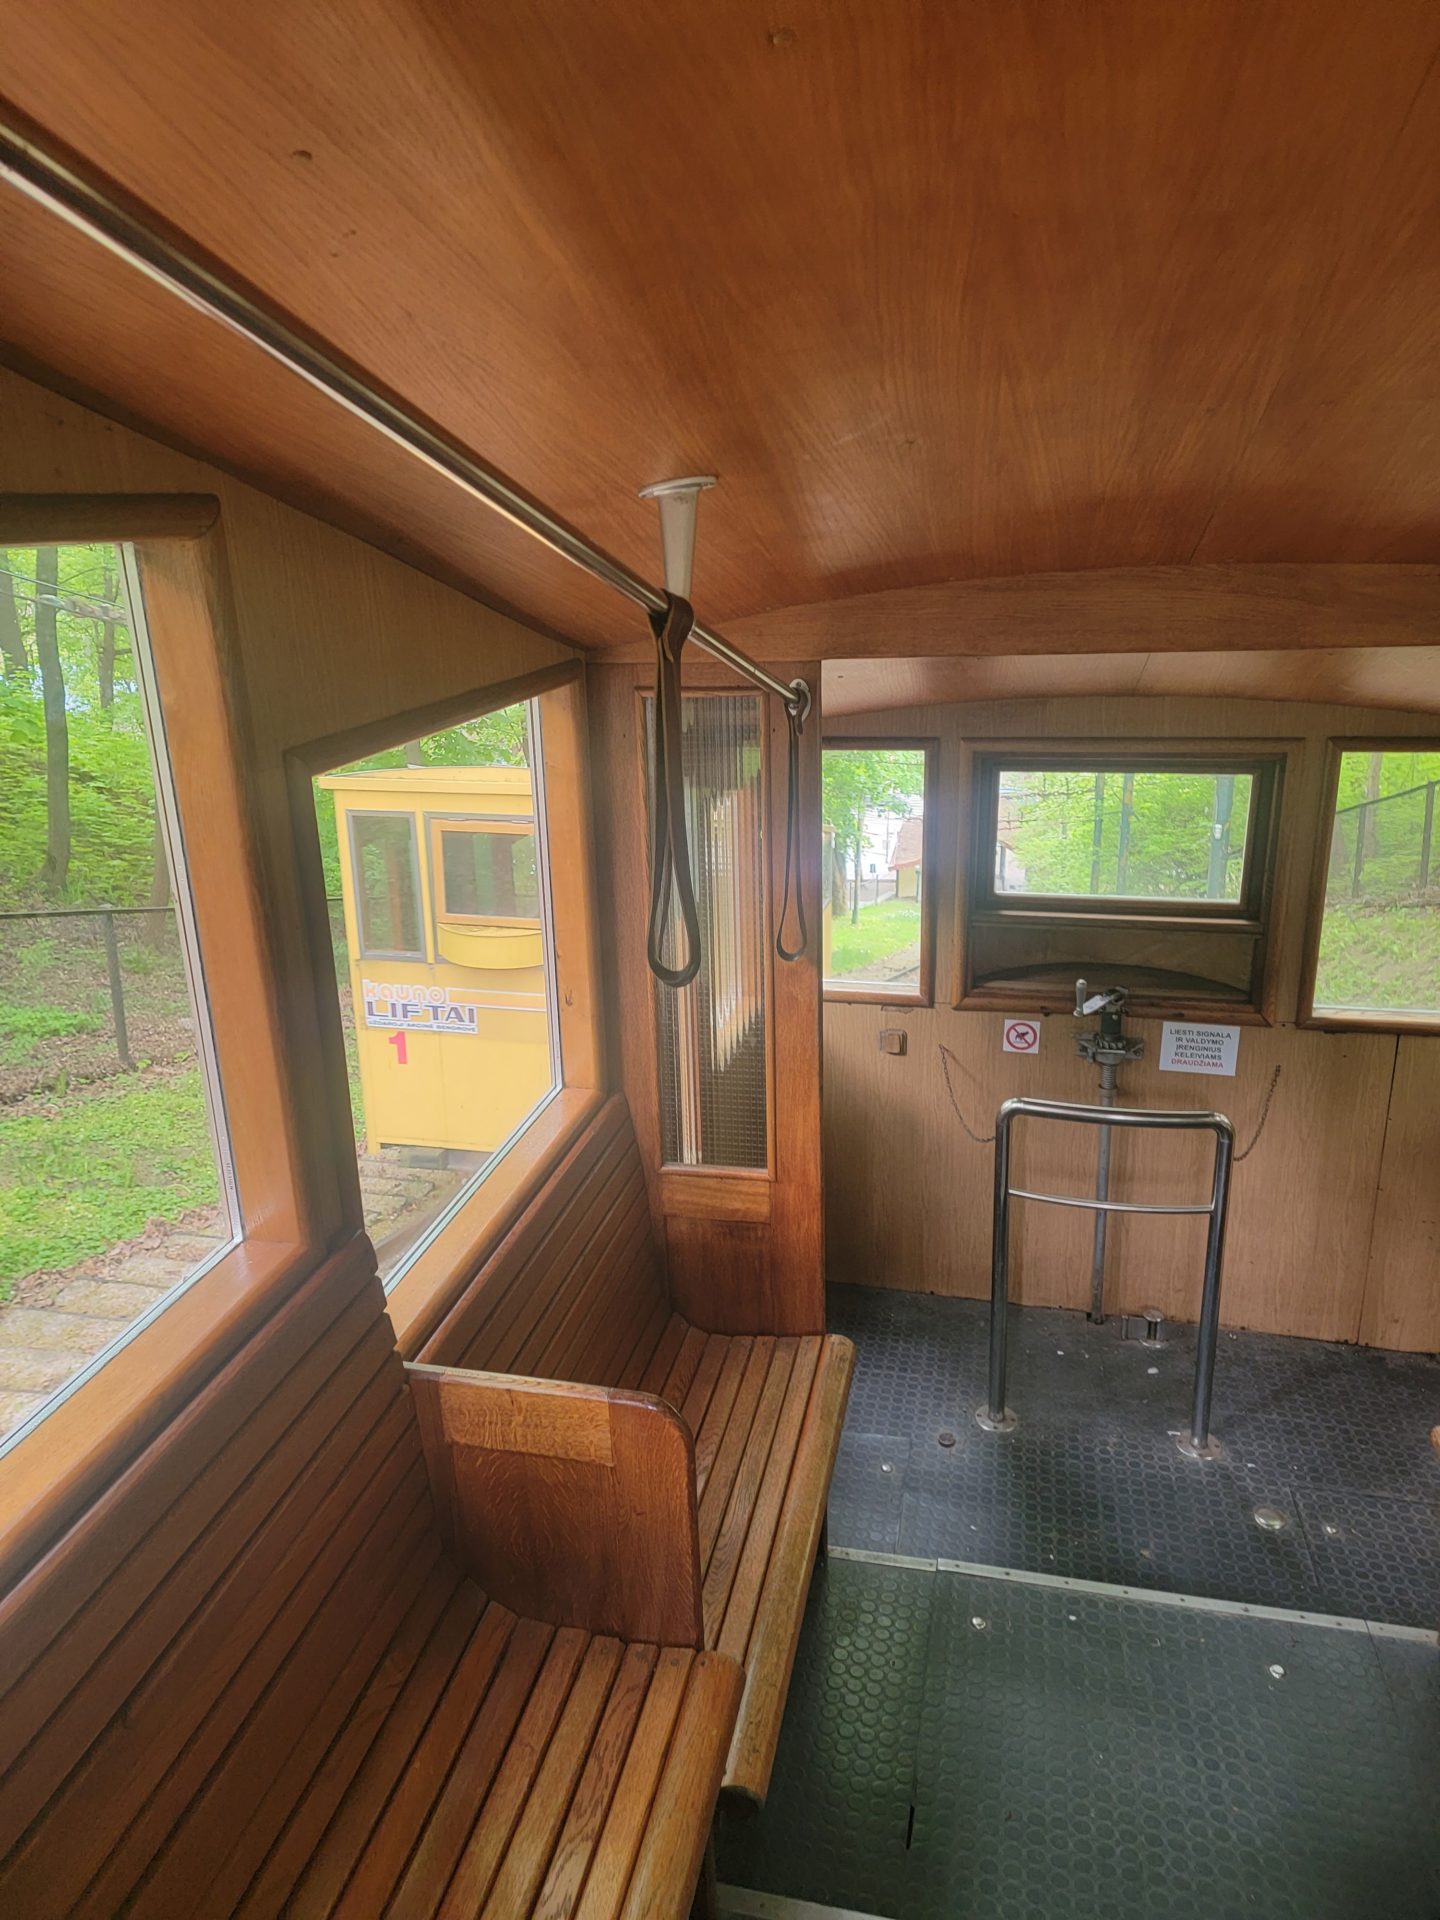 inside a wooden train with a bench and a metal bar